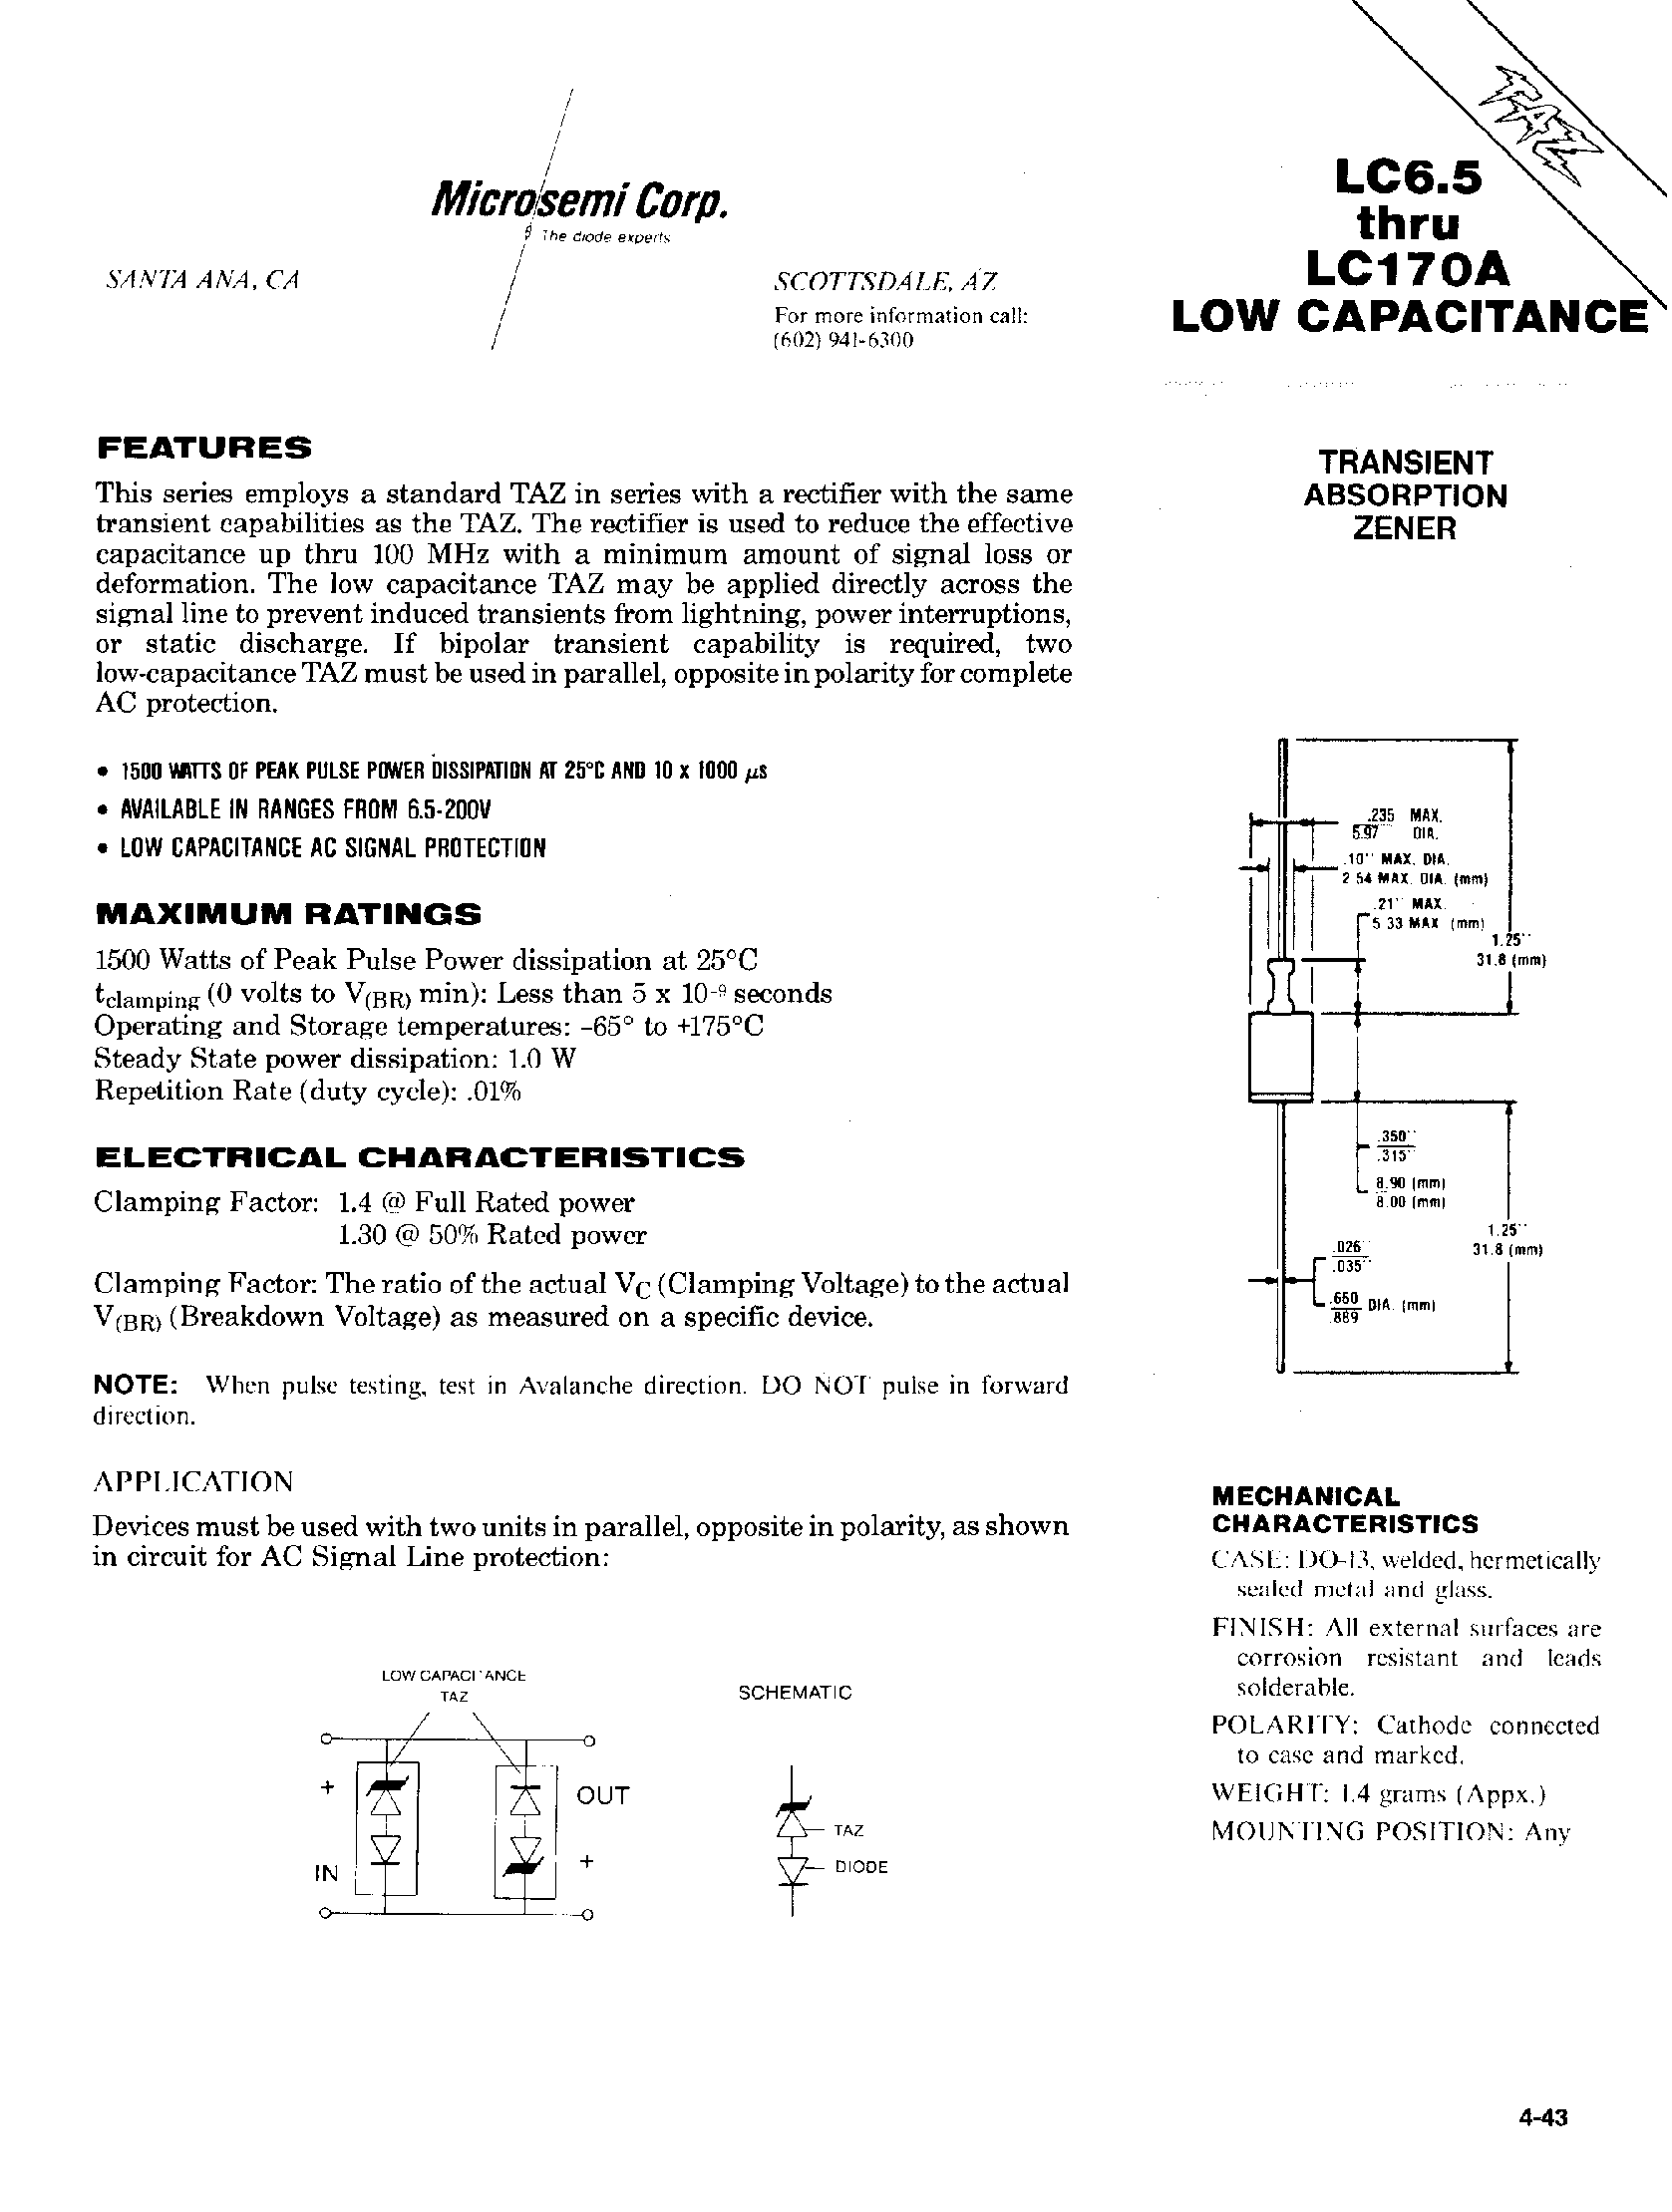 Даташит LC120A - TRANSIENT ABSORPTION ZENER страница 1